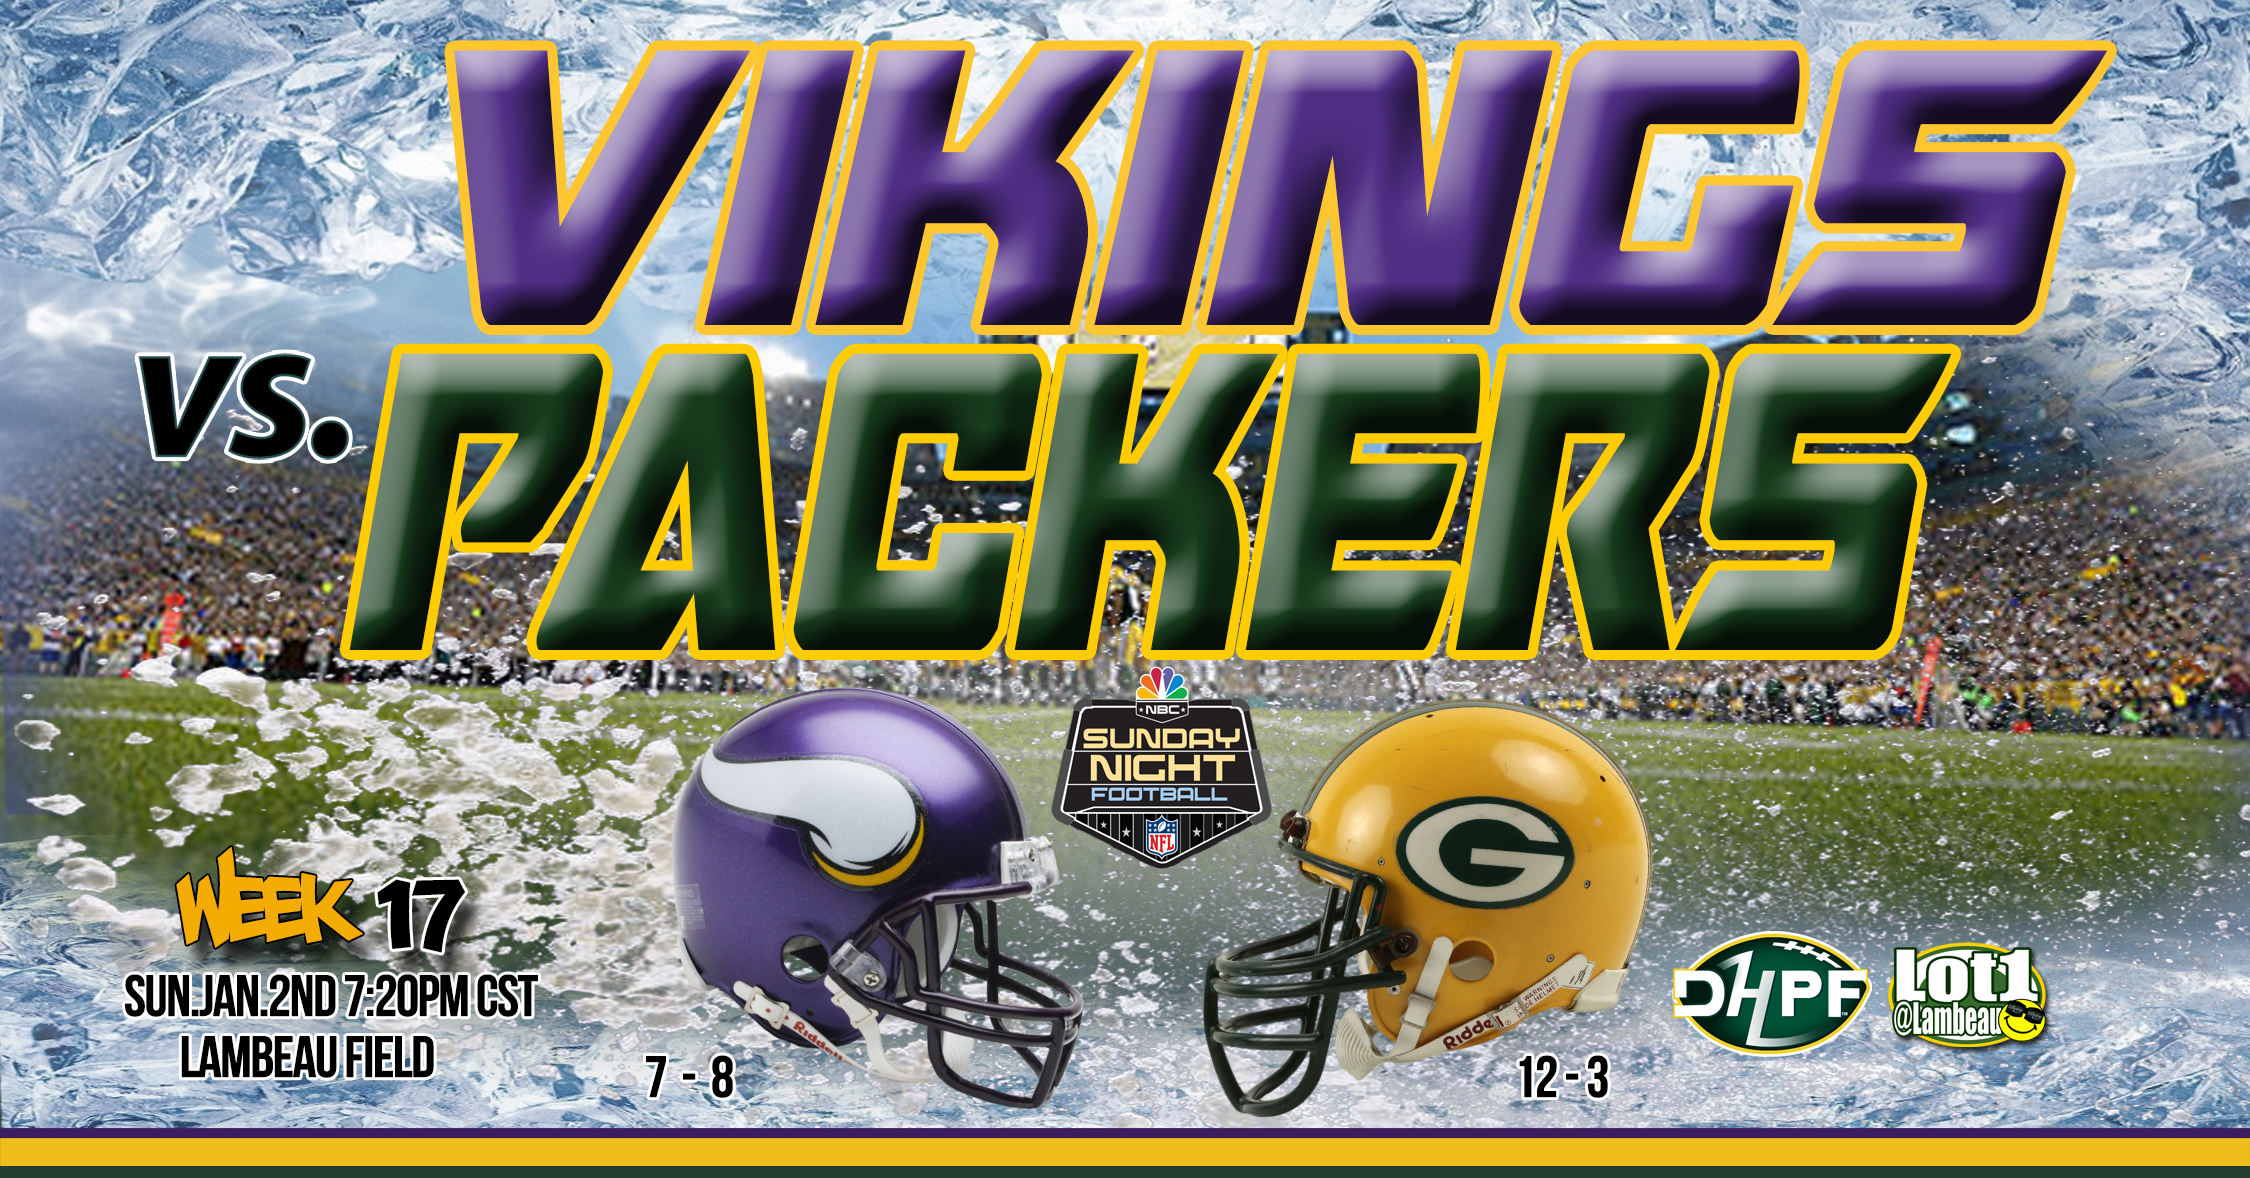 Packers look to get red hot during a chilly Sunday night vs the Vikings